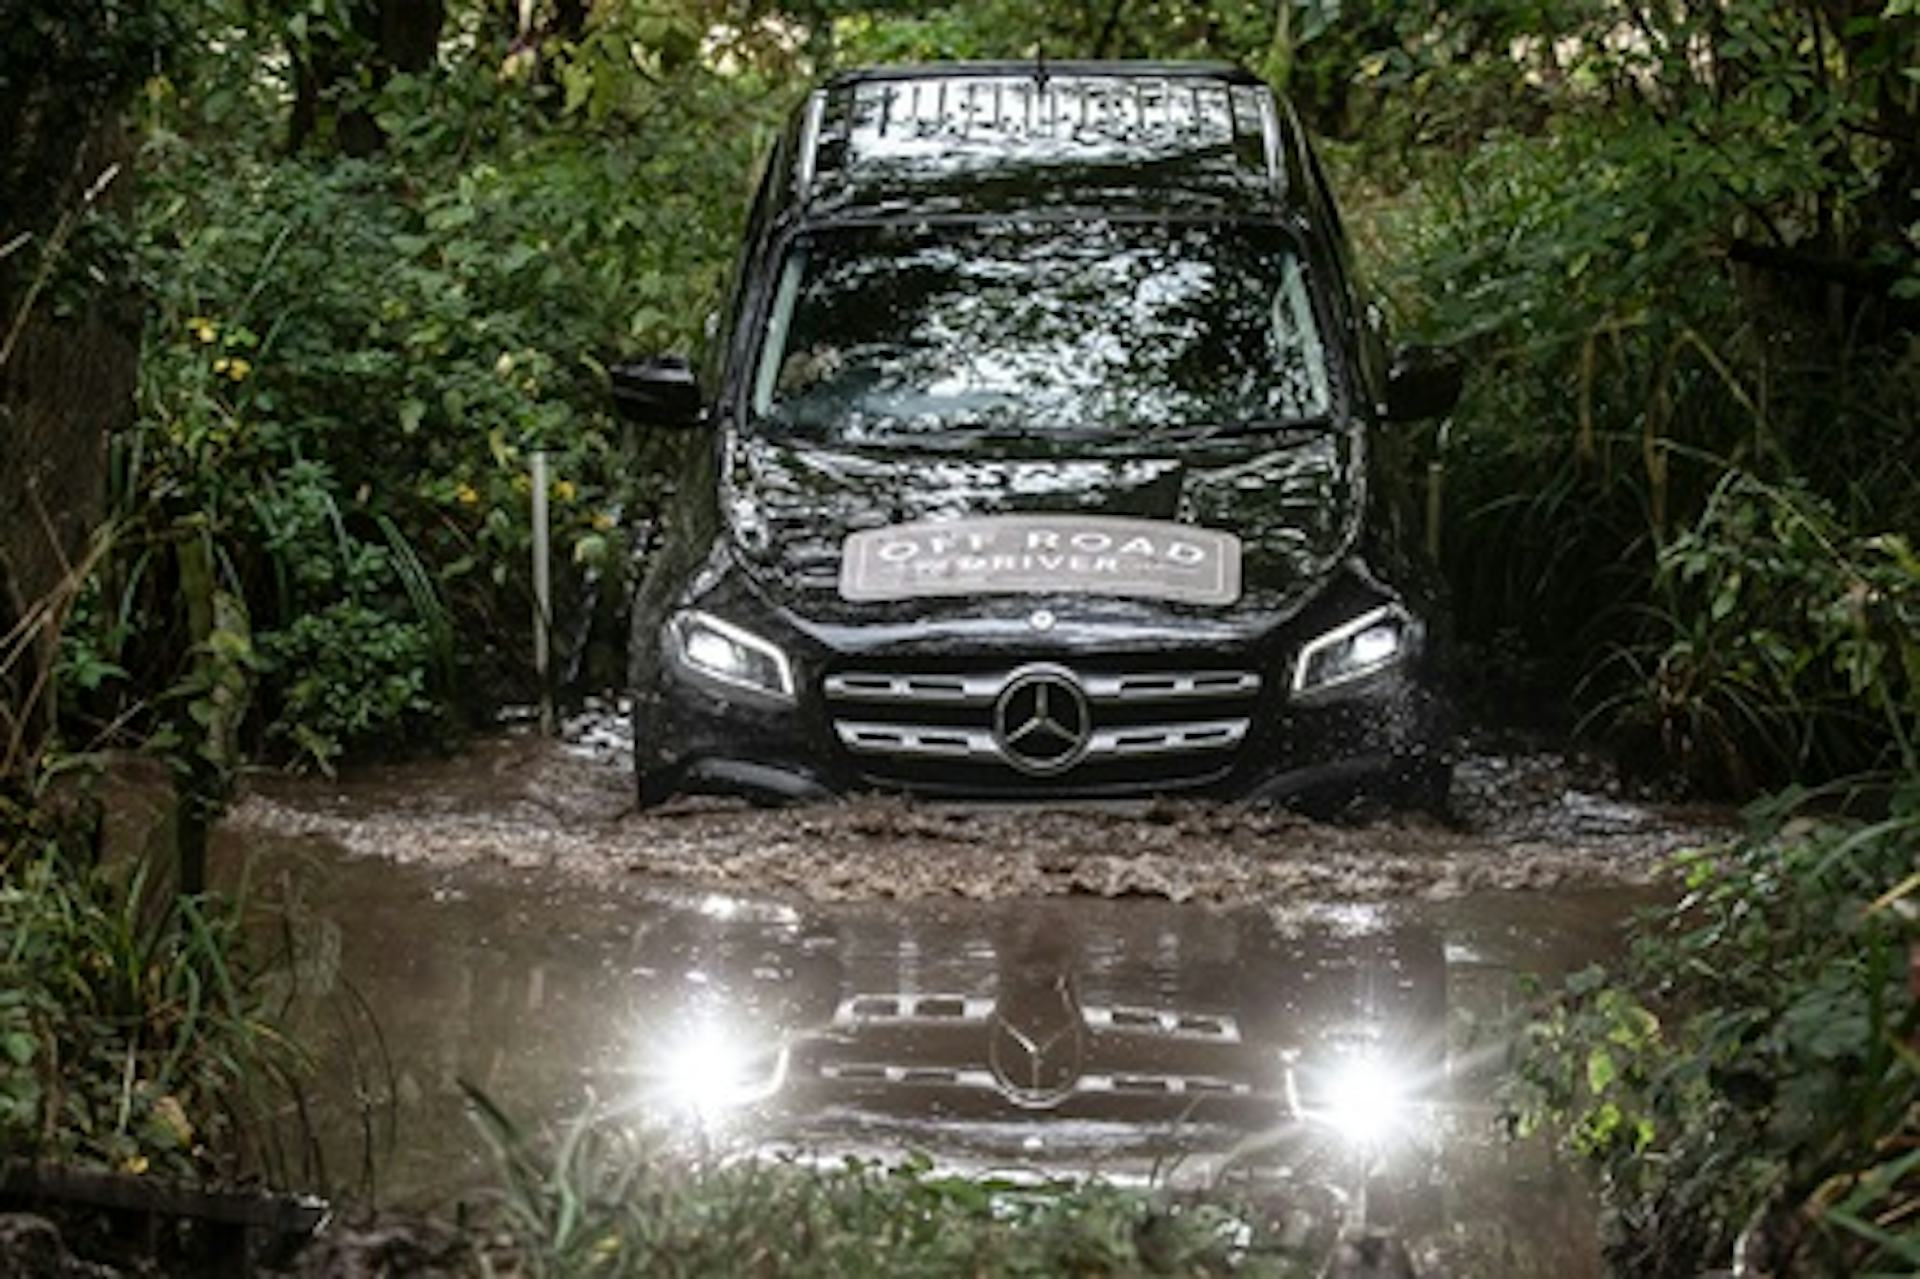 60 minute Junior 4x4 Experience with Off Road Driver